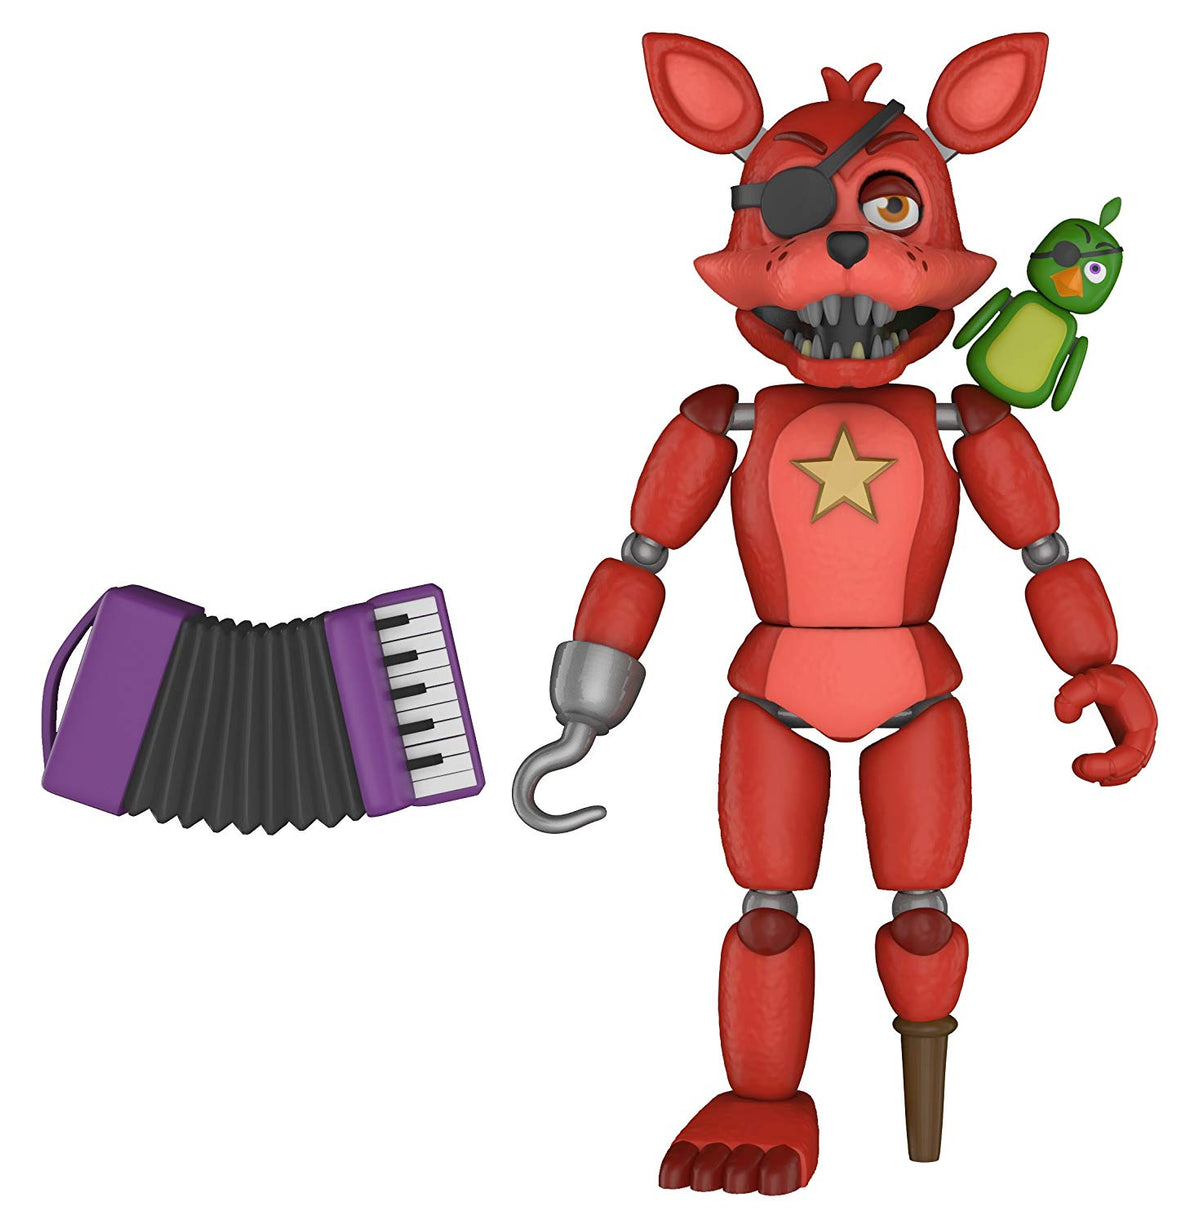 nights at freddy's action figures